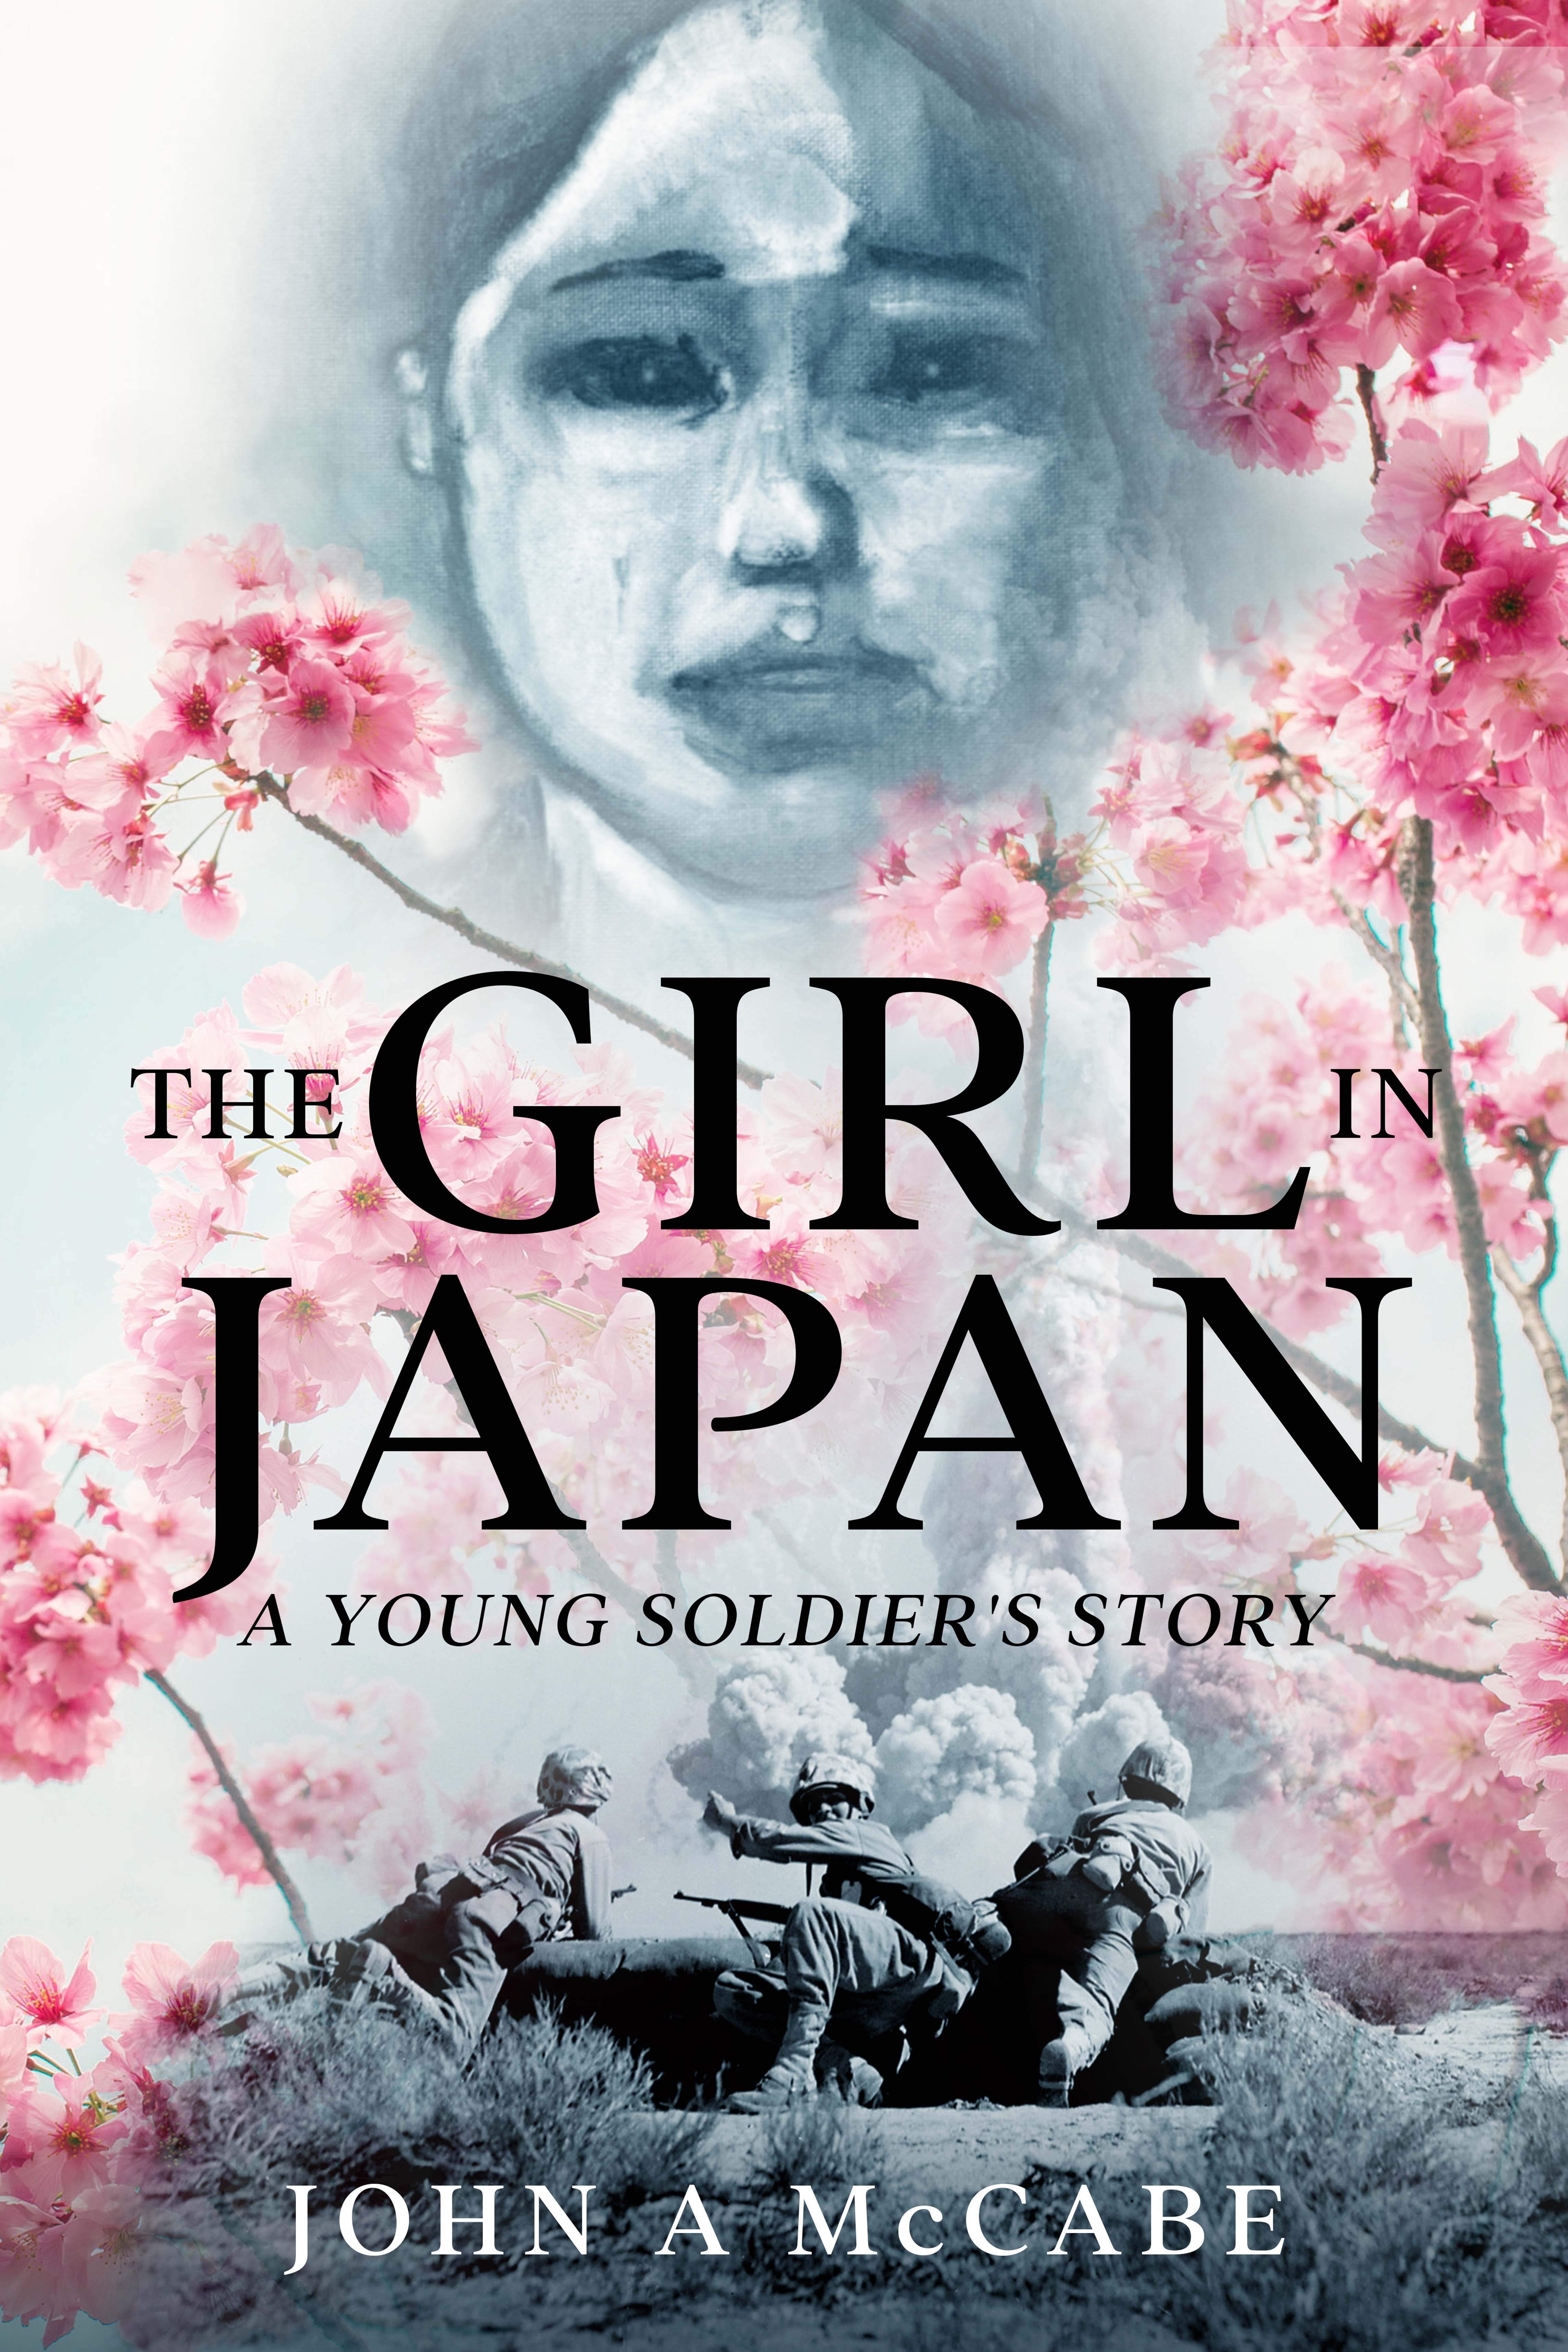 Author John A. McCabe to Release New Novel - Follows the Lives of a Japanese Woman & U.S. Soldier Exposed to Atom Bombs